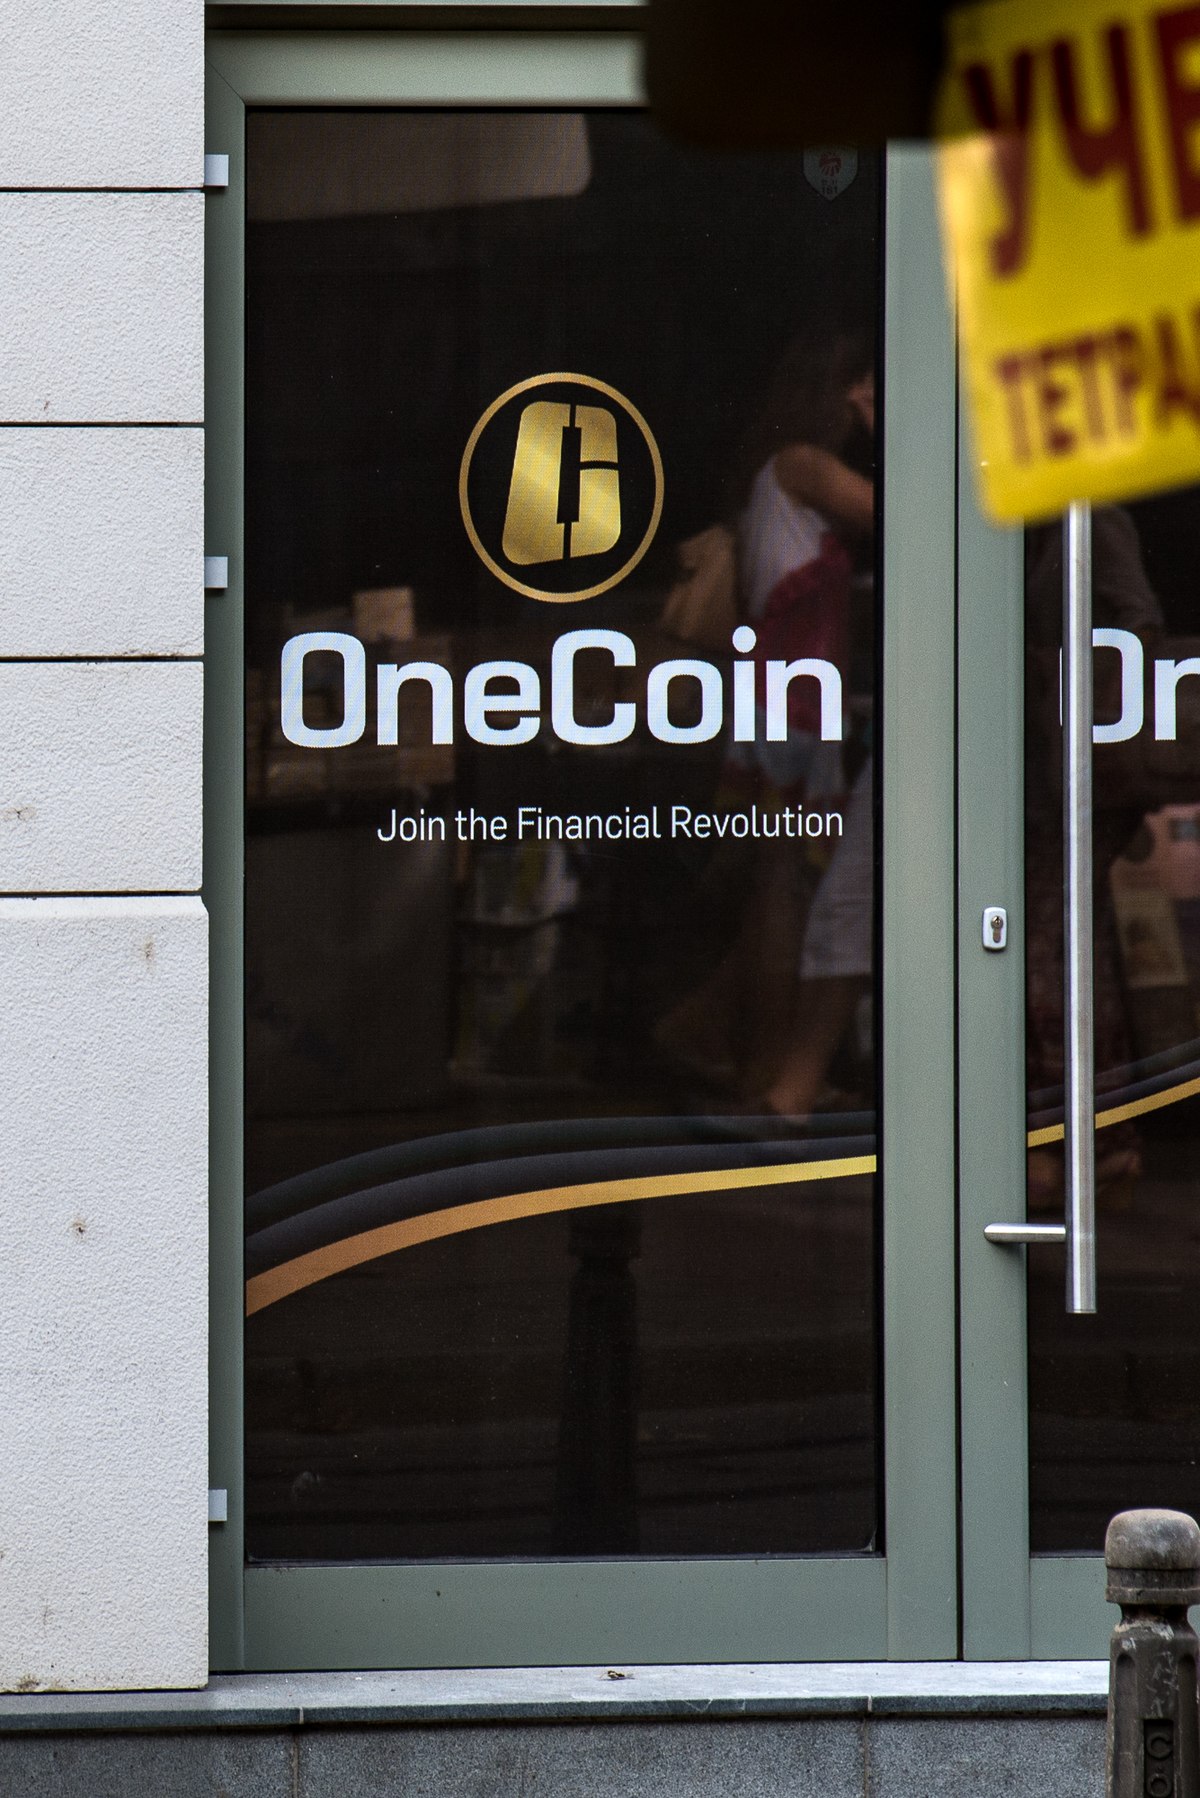 OneCoin cryptocurrency scheme not direct focus of probe, govt says | RNZ News